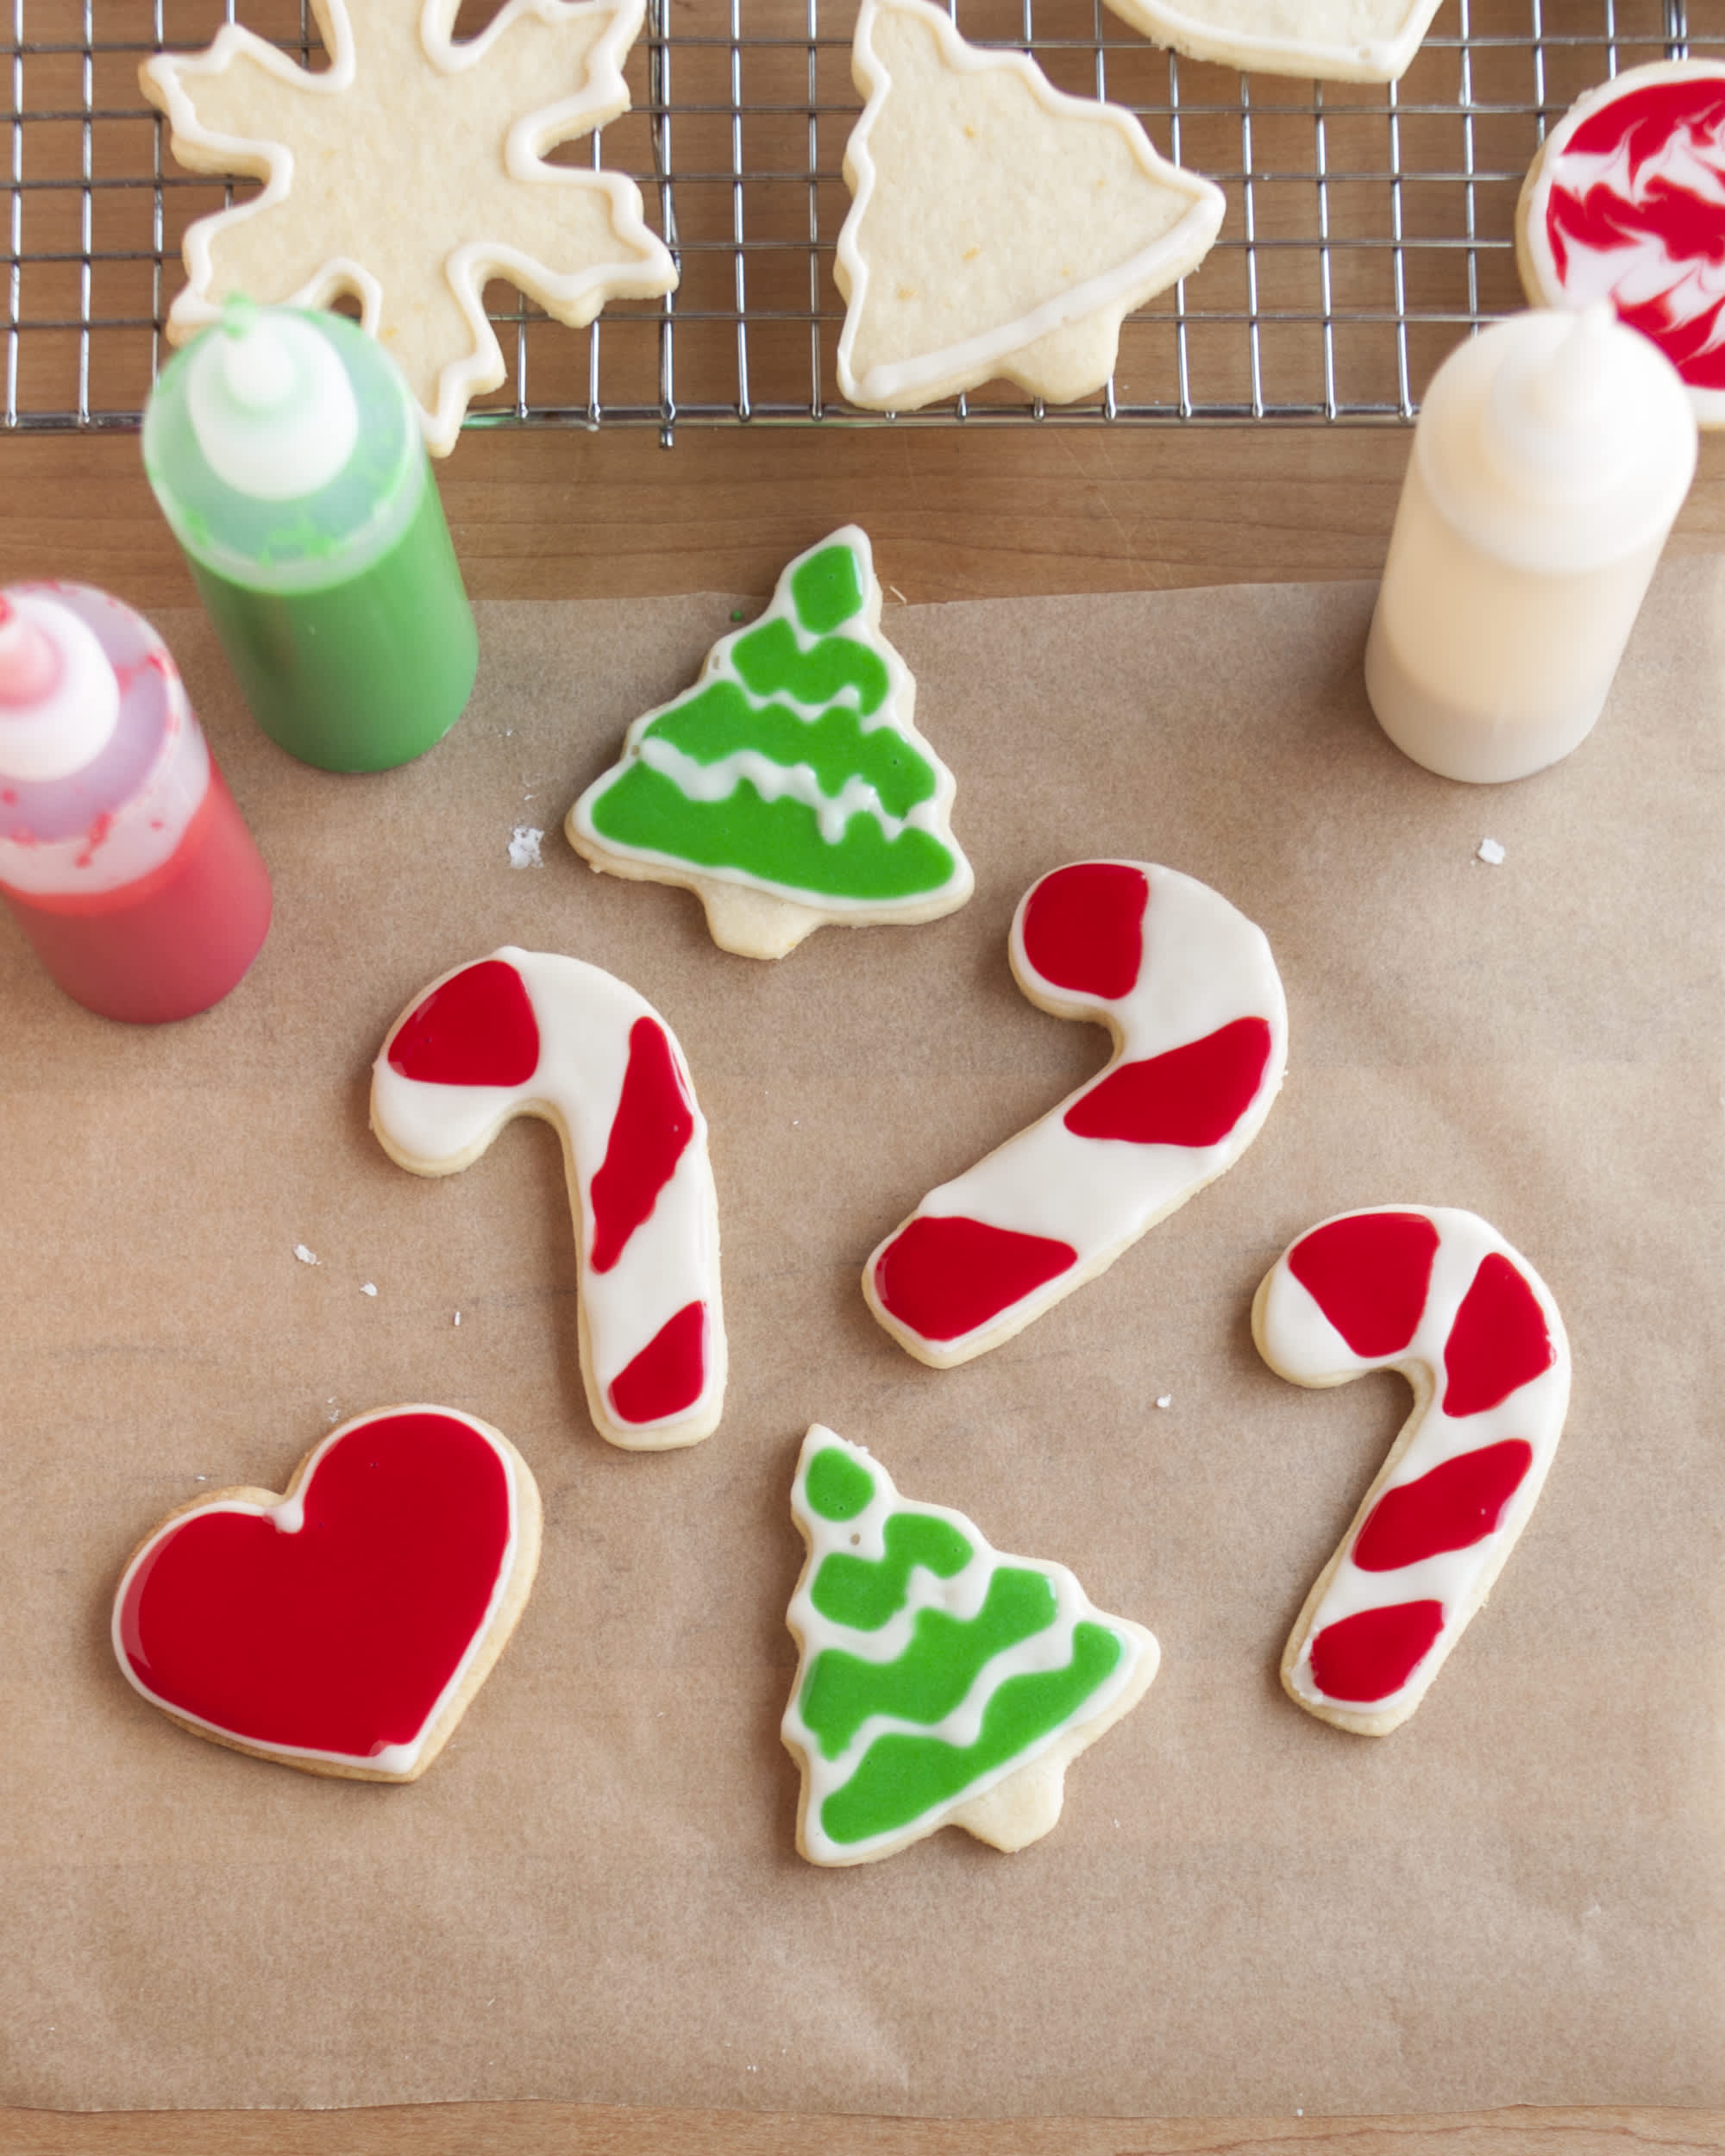 The Secret of Beautifully Decorated Cookies Is a Cheap Squeeze